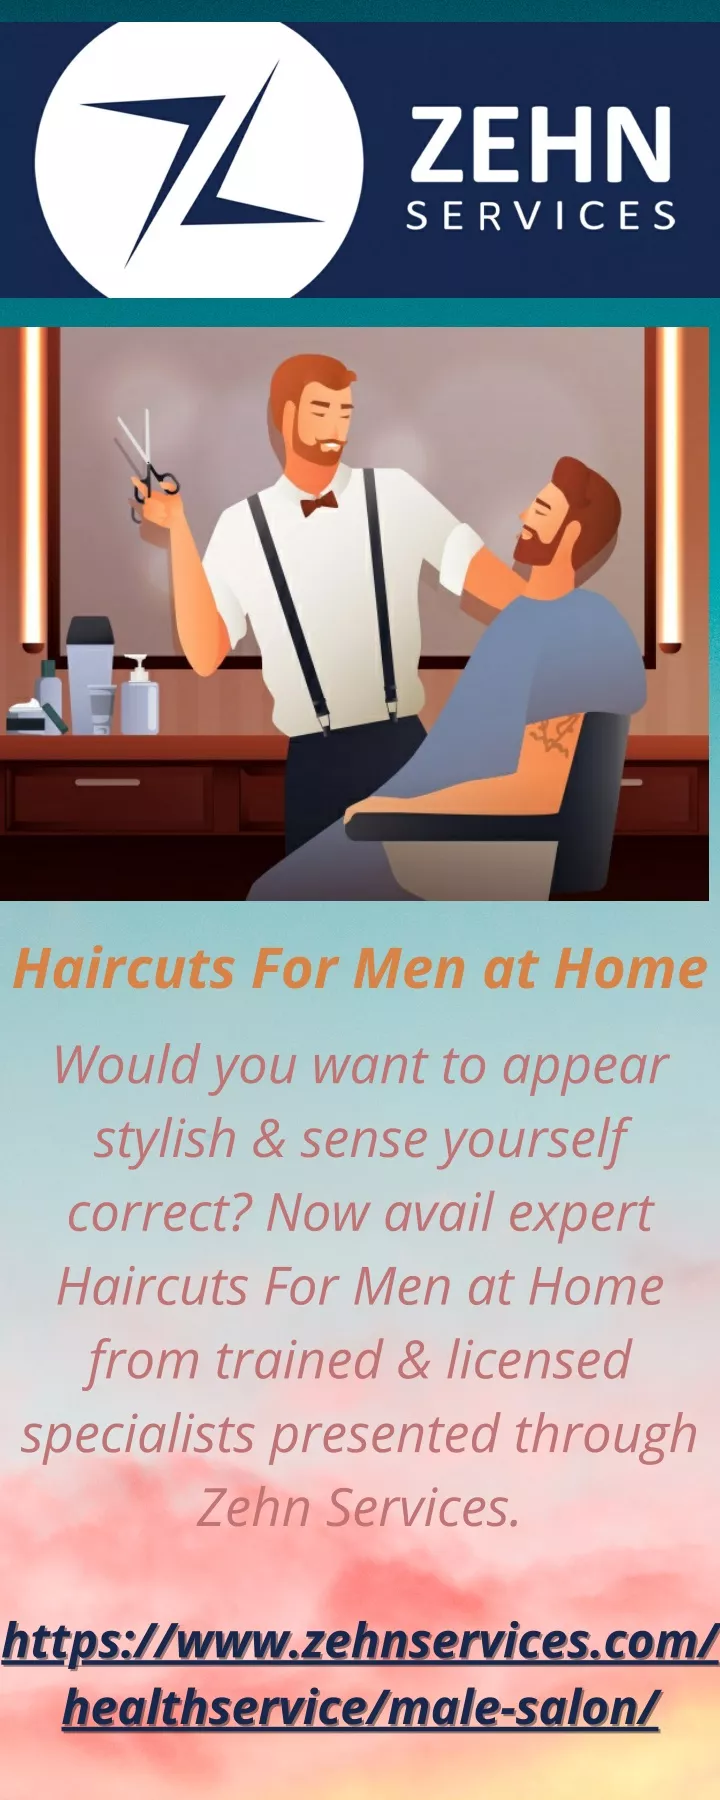 haircuts for men at home would you want to appear